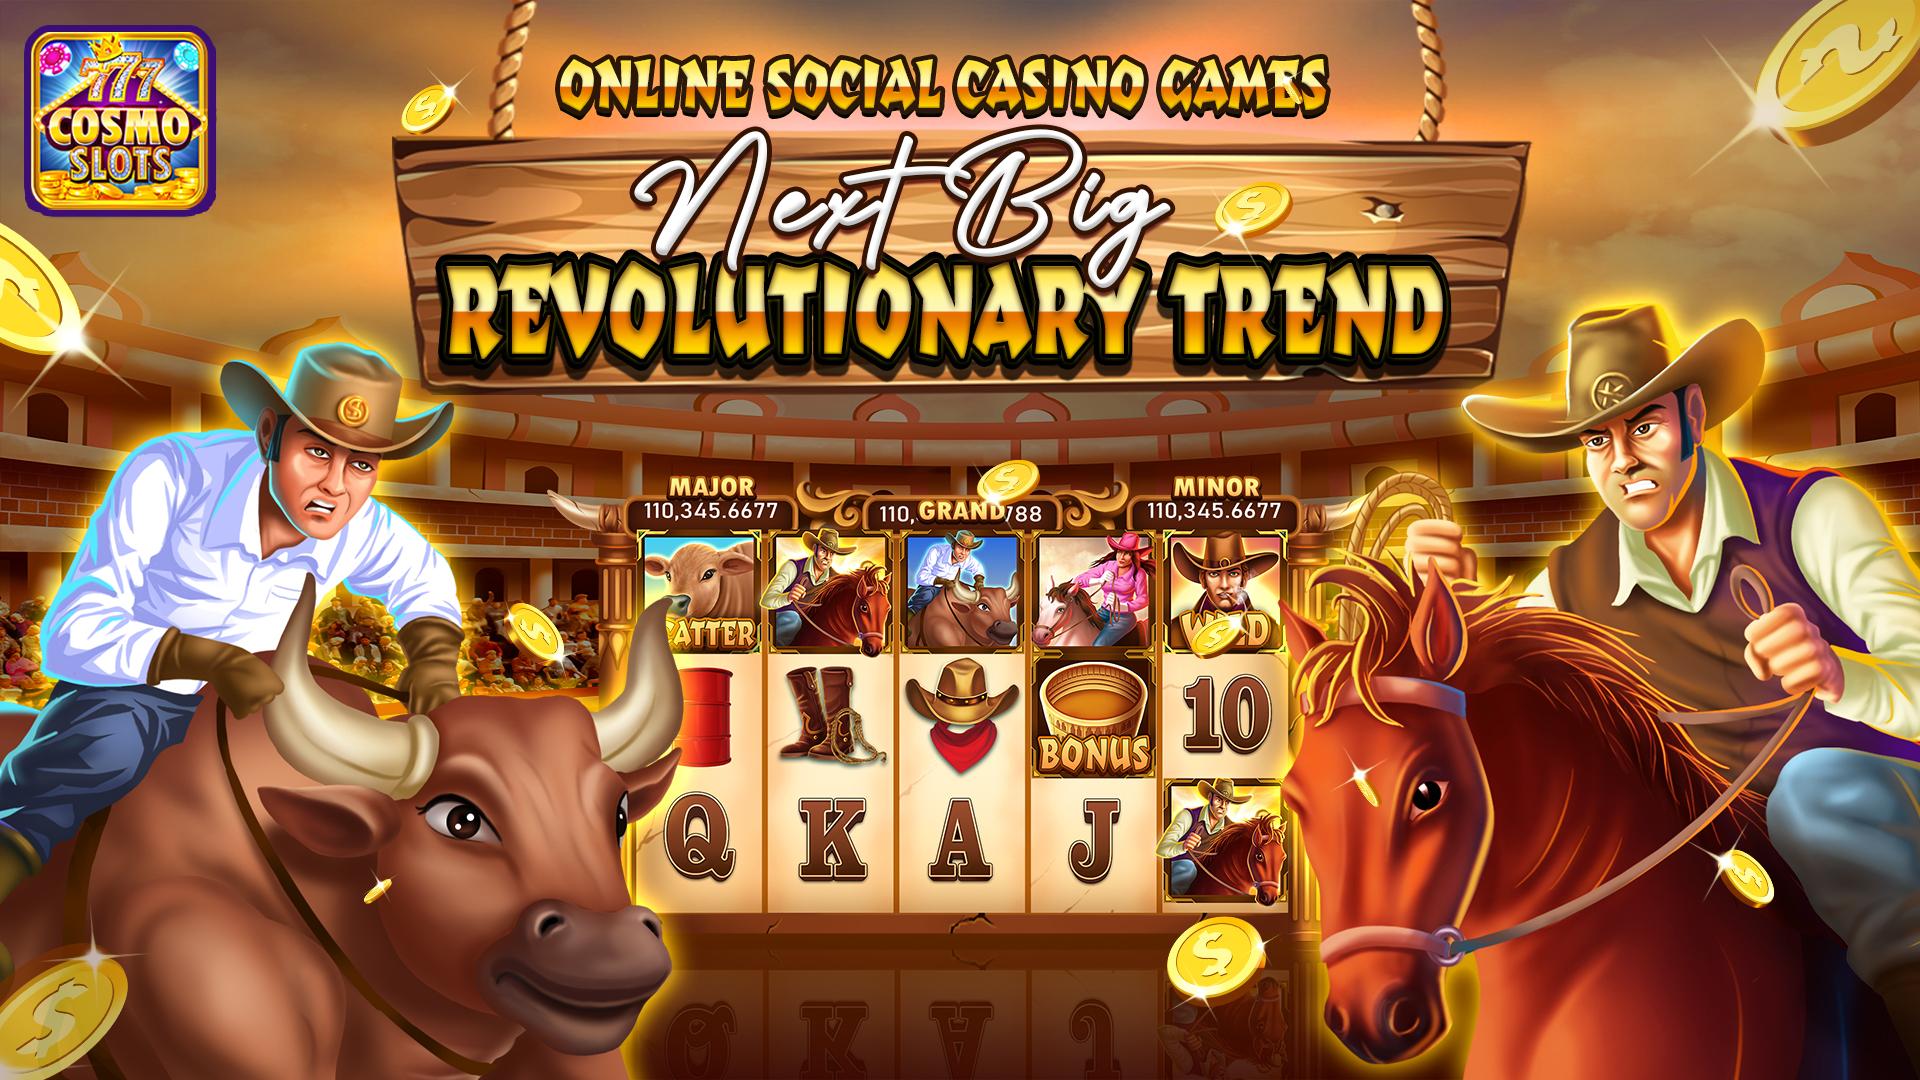 Are Online Social Casino Games is the Next Big Revolutionary Trend?